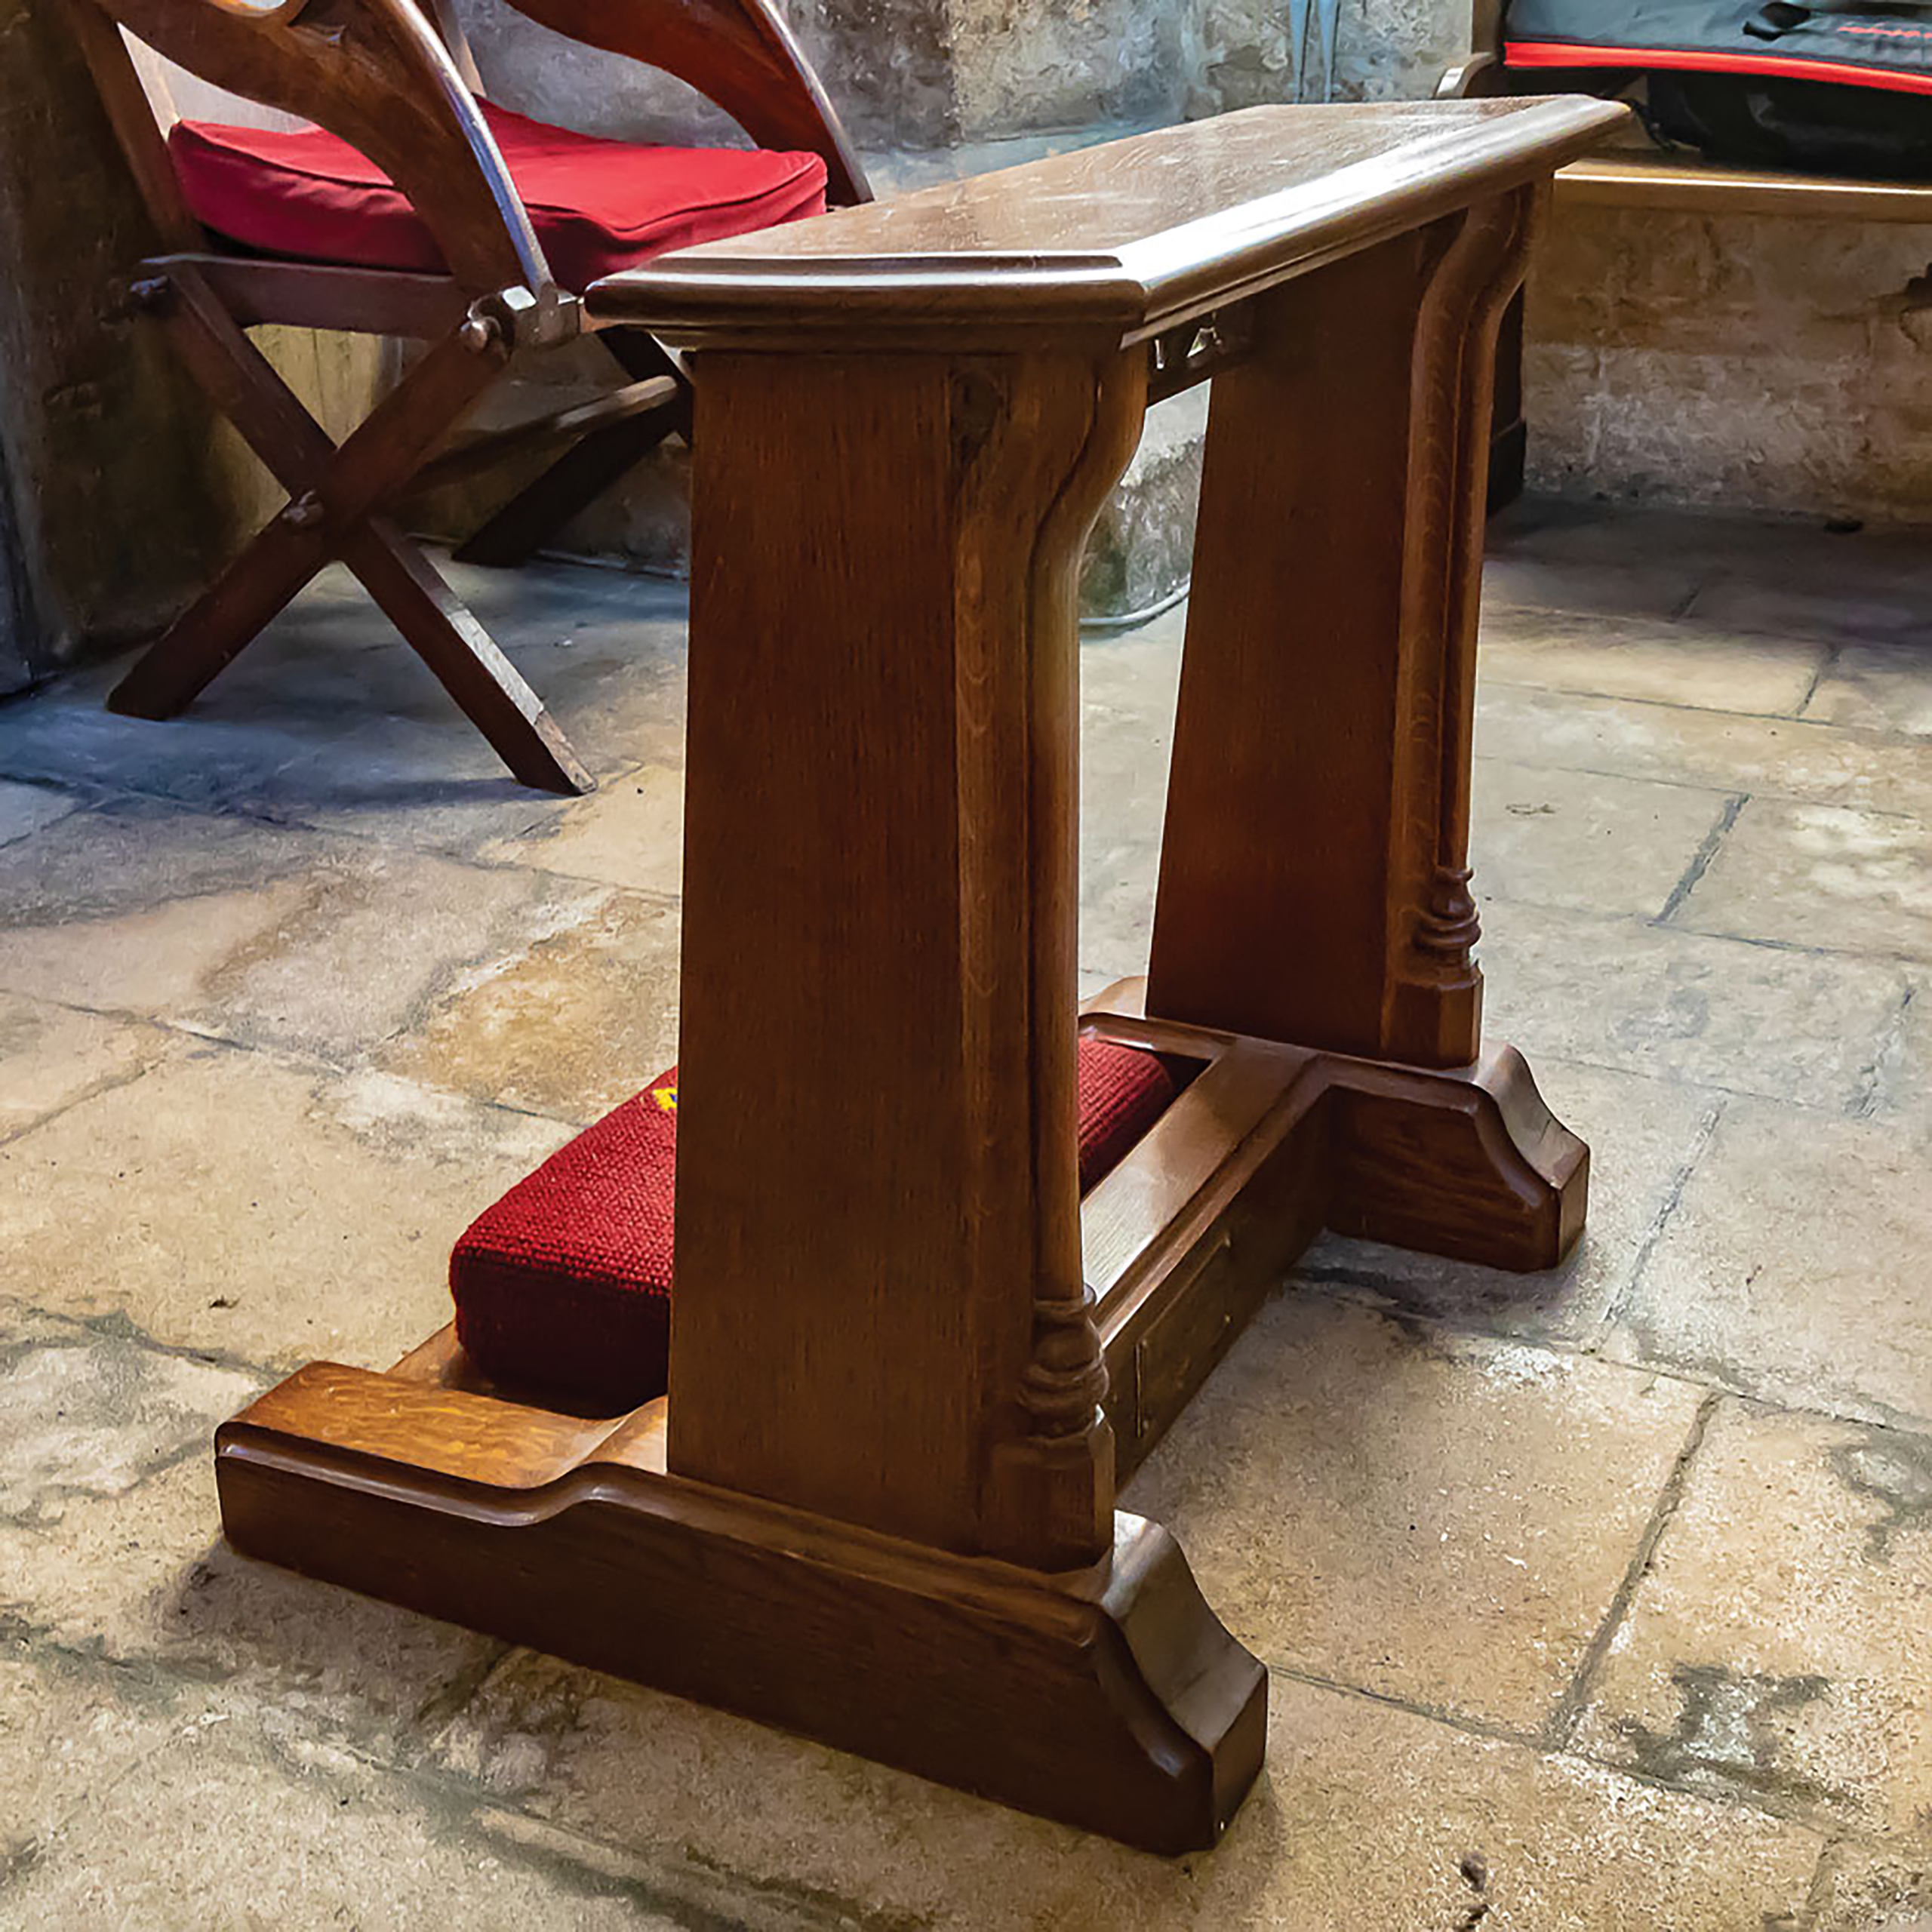 Ecclesiastical Joinery